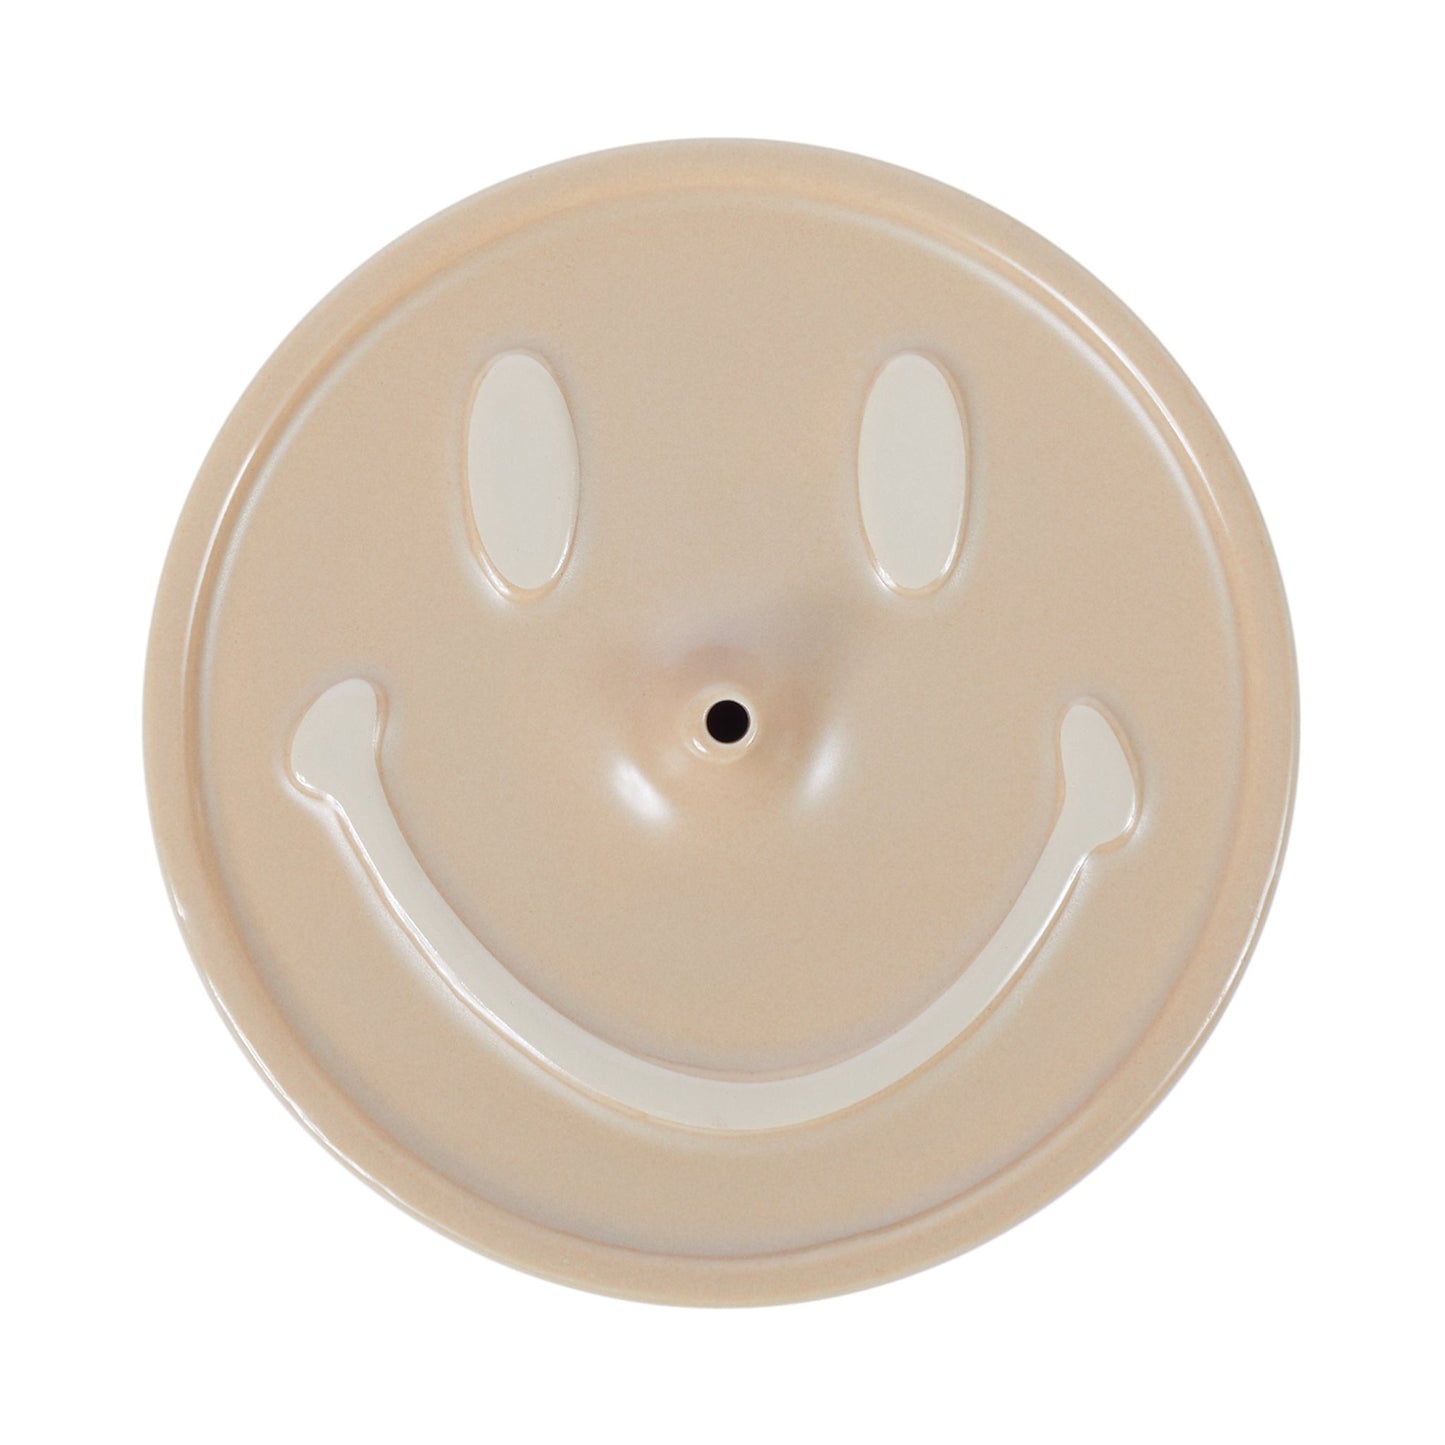 MARKET clothing brand SMILEY CERAMIC INCENSE HOLDER. Find more homegoods and graphic tees at MarketStudios.com. Formally Chinatown Market. 